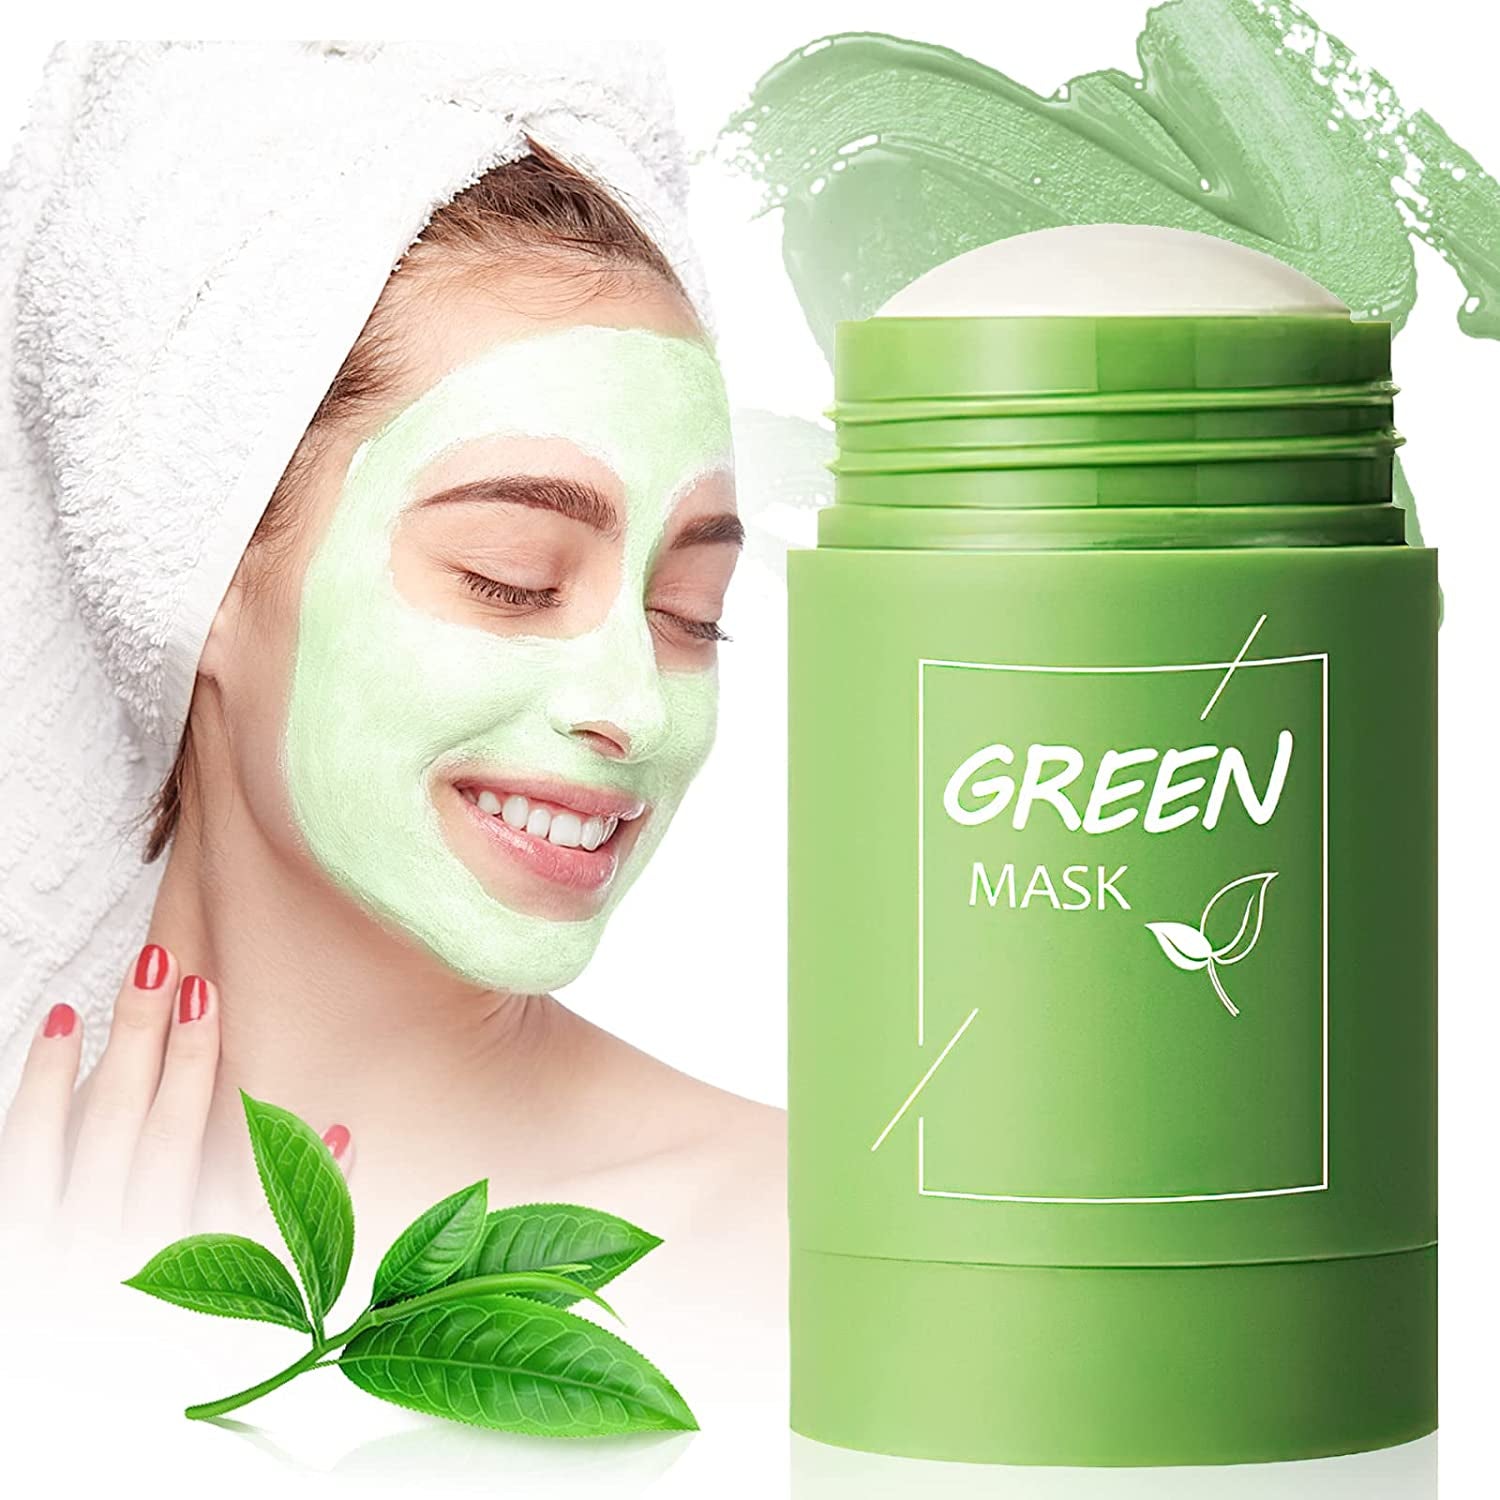 Green Tea Mask Stick Deep Pore Cleansing, Oil Control, Acne Remover for All Skin